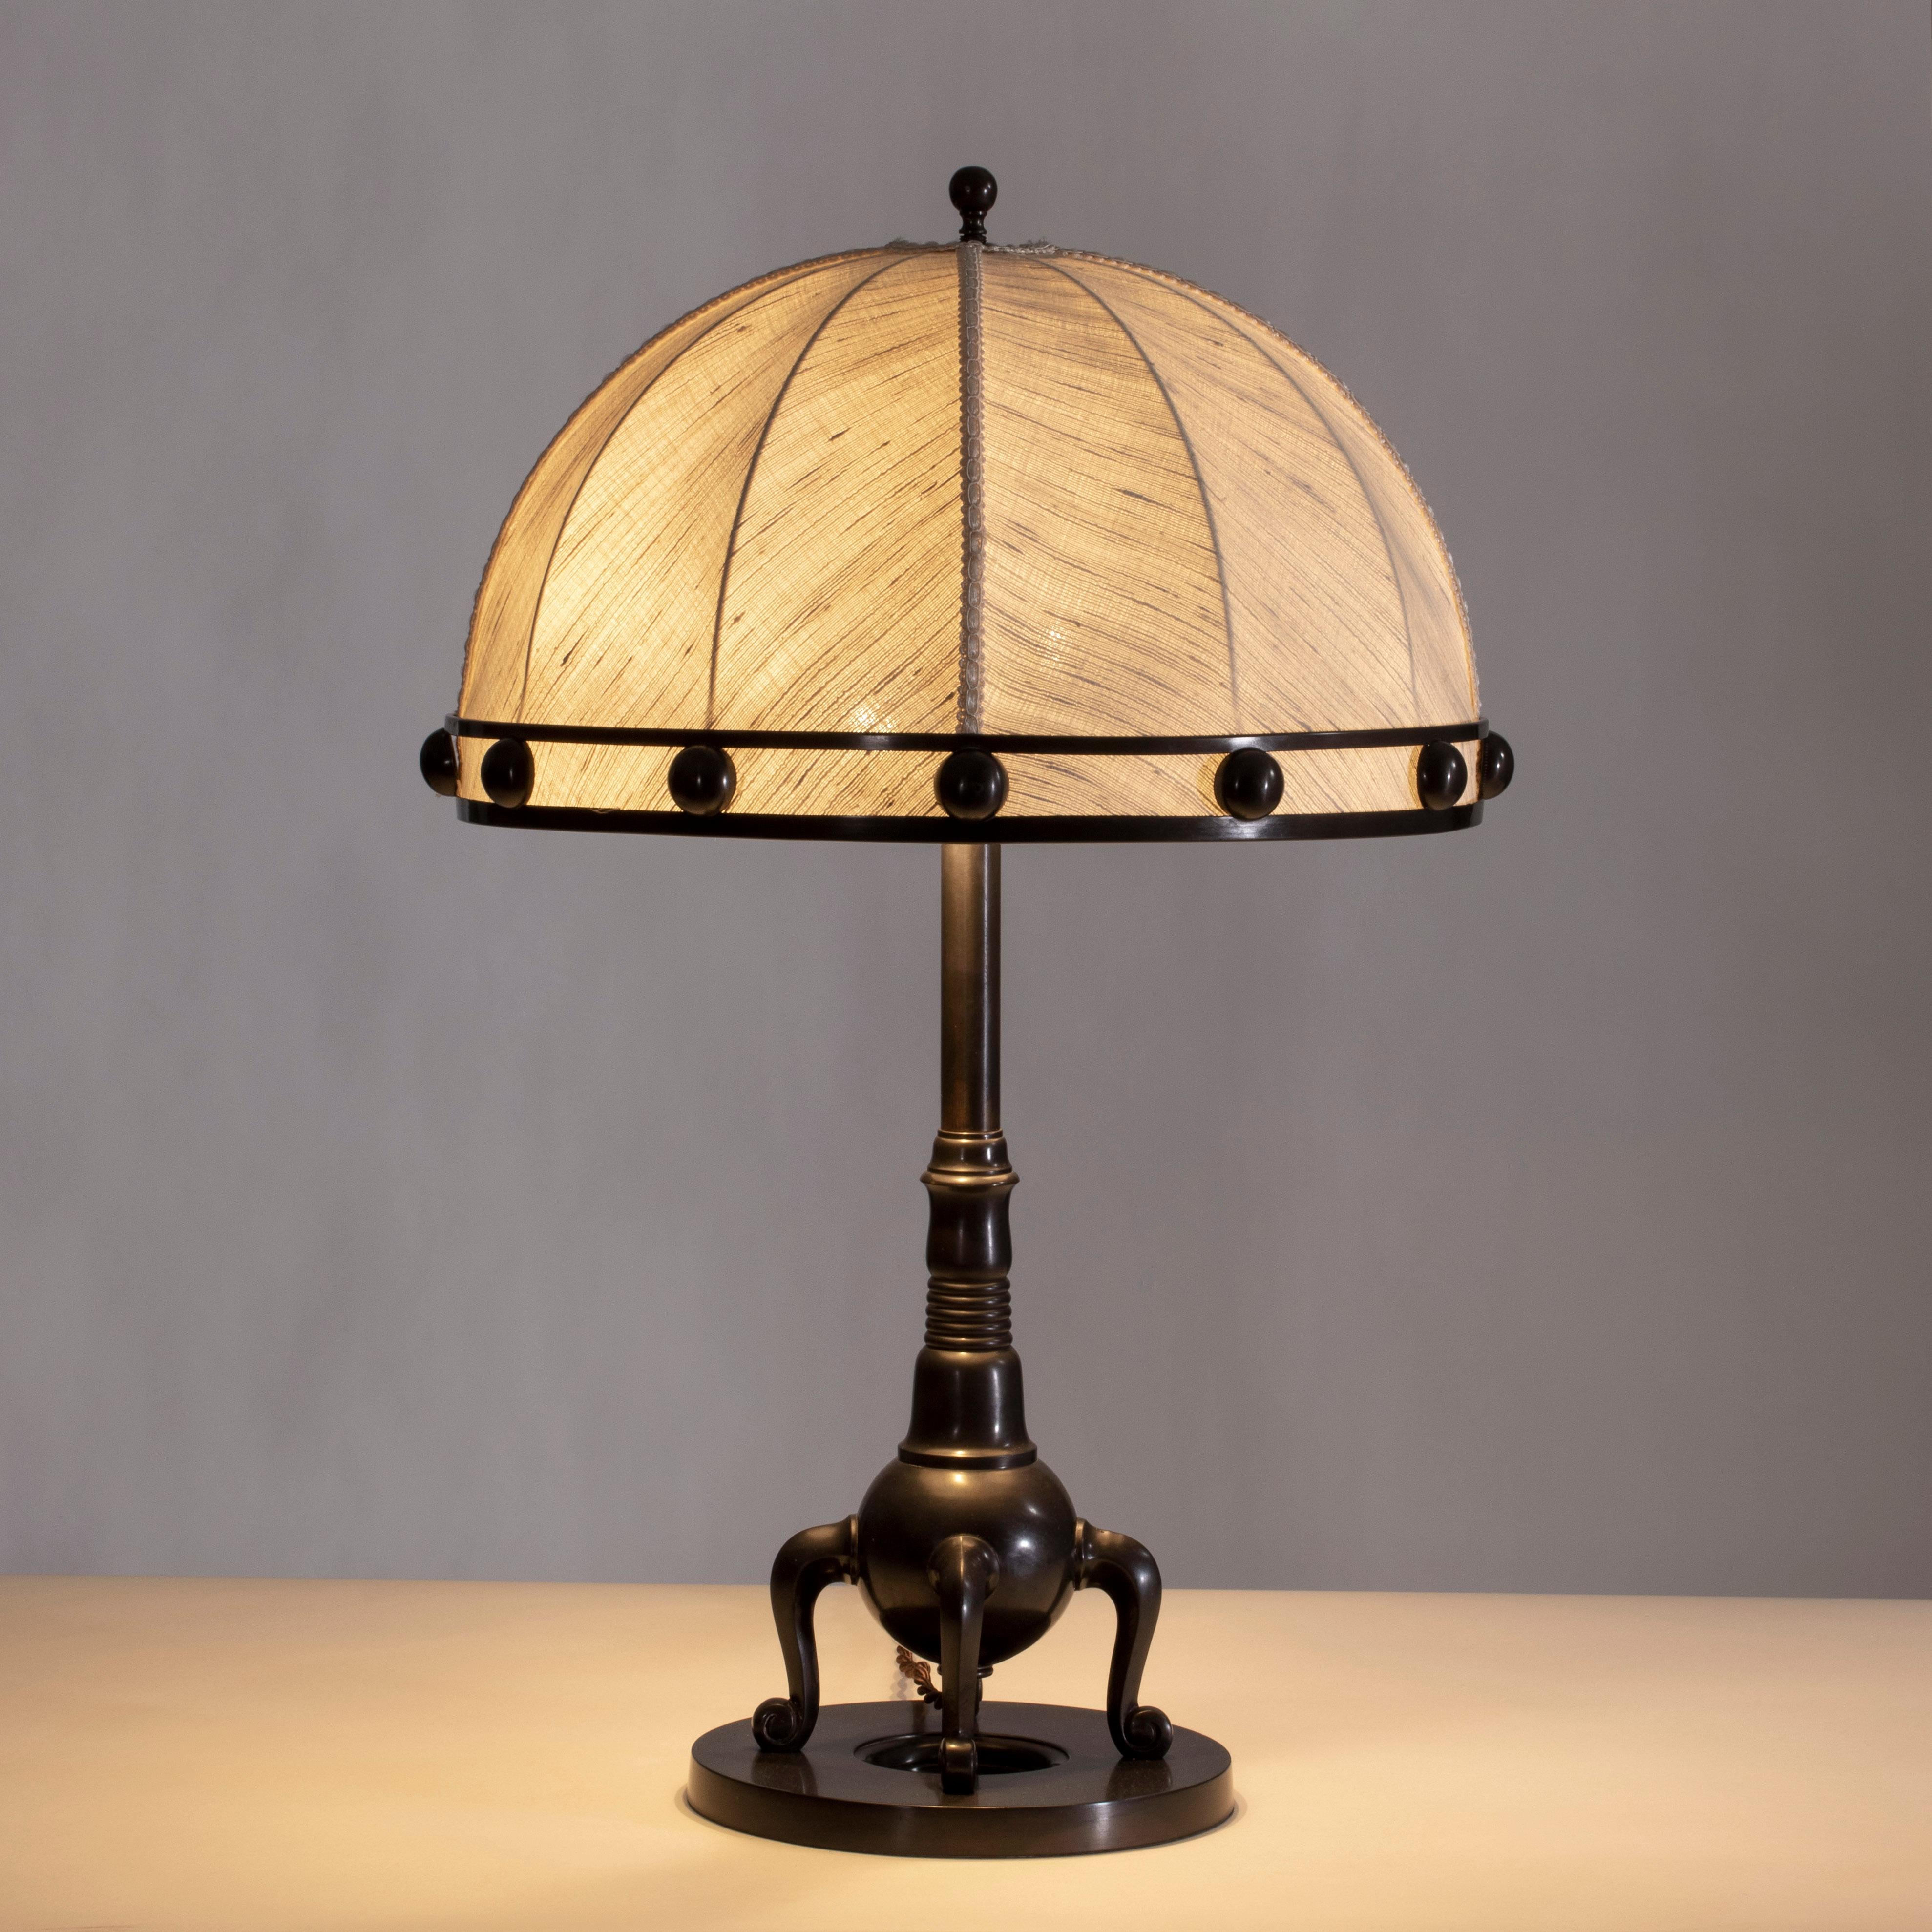 The ball finial, ingeniously doubling as the light switch, above a domed shade mounted with a studded collar in patinated brass, the matching brass standard resting on four s-curved and scrolled legs, on an open circular base. 

Rewired for the